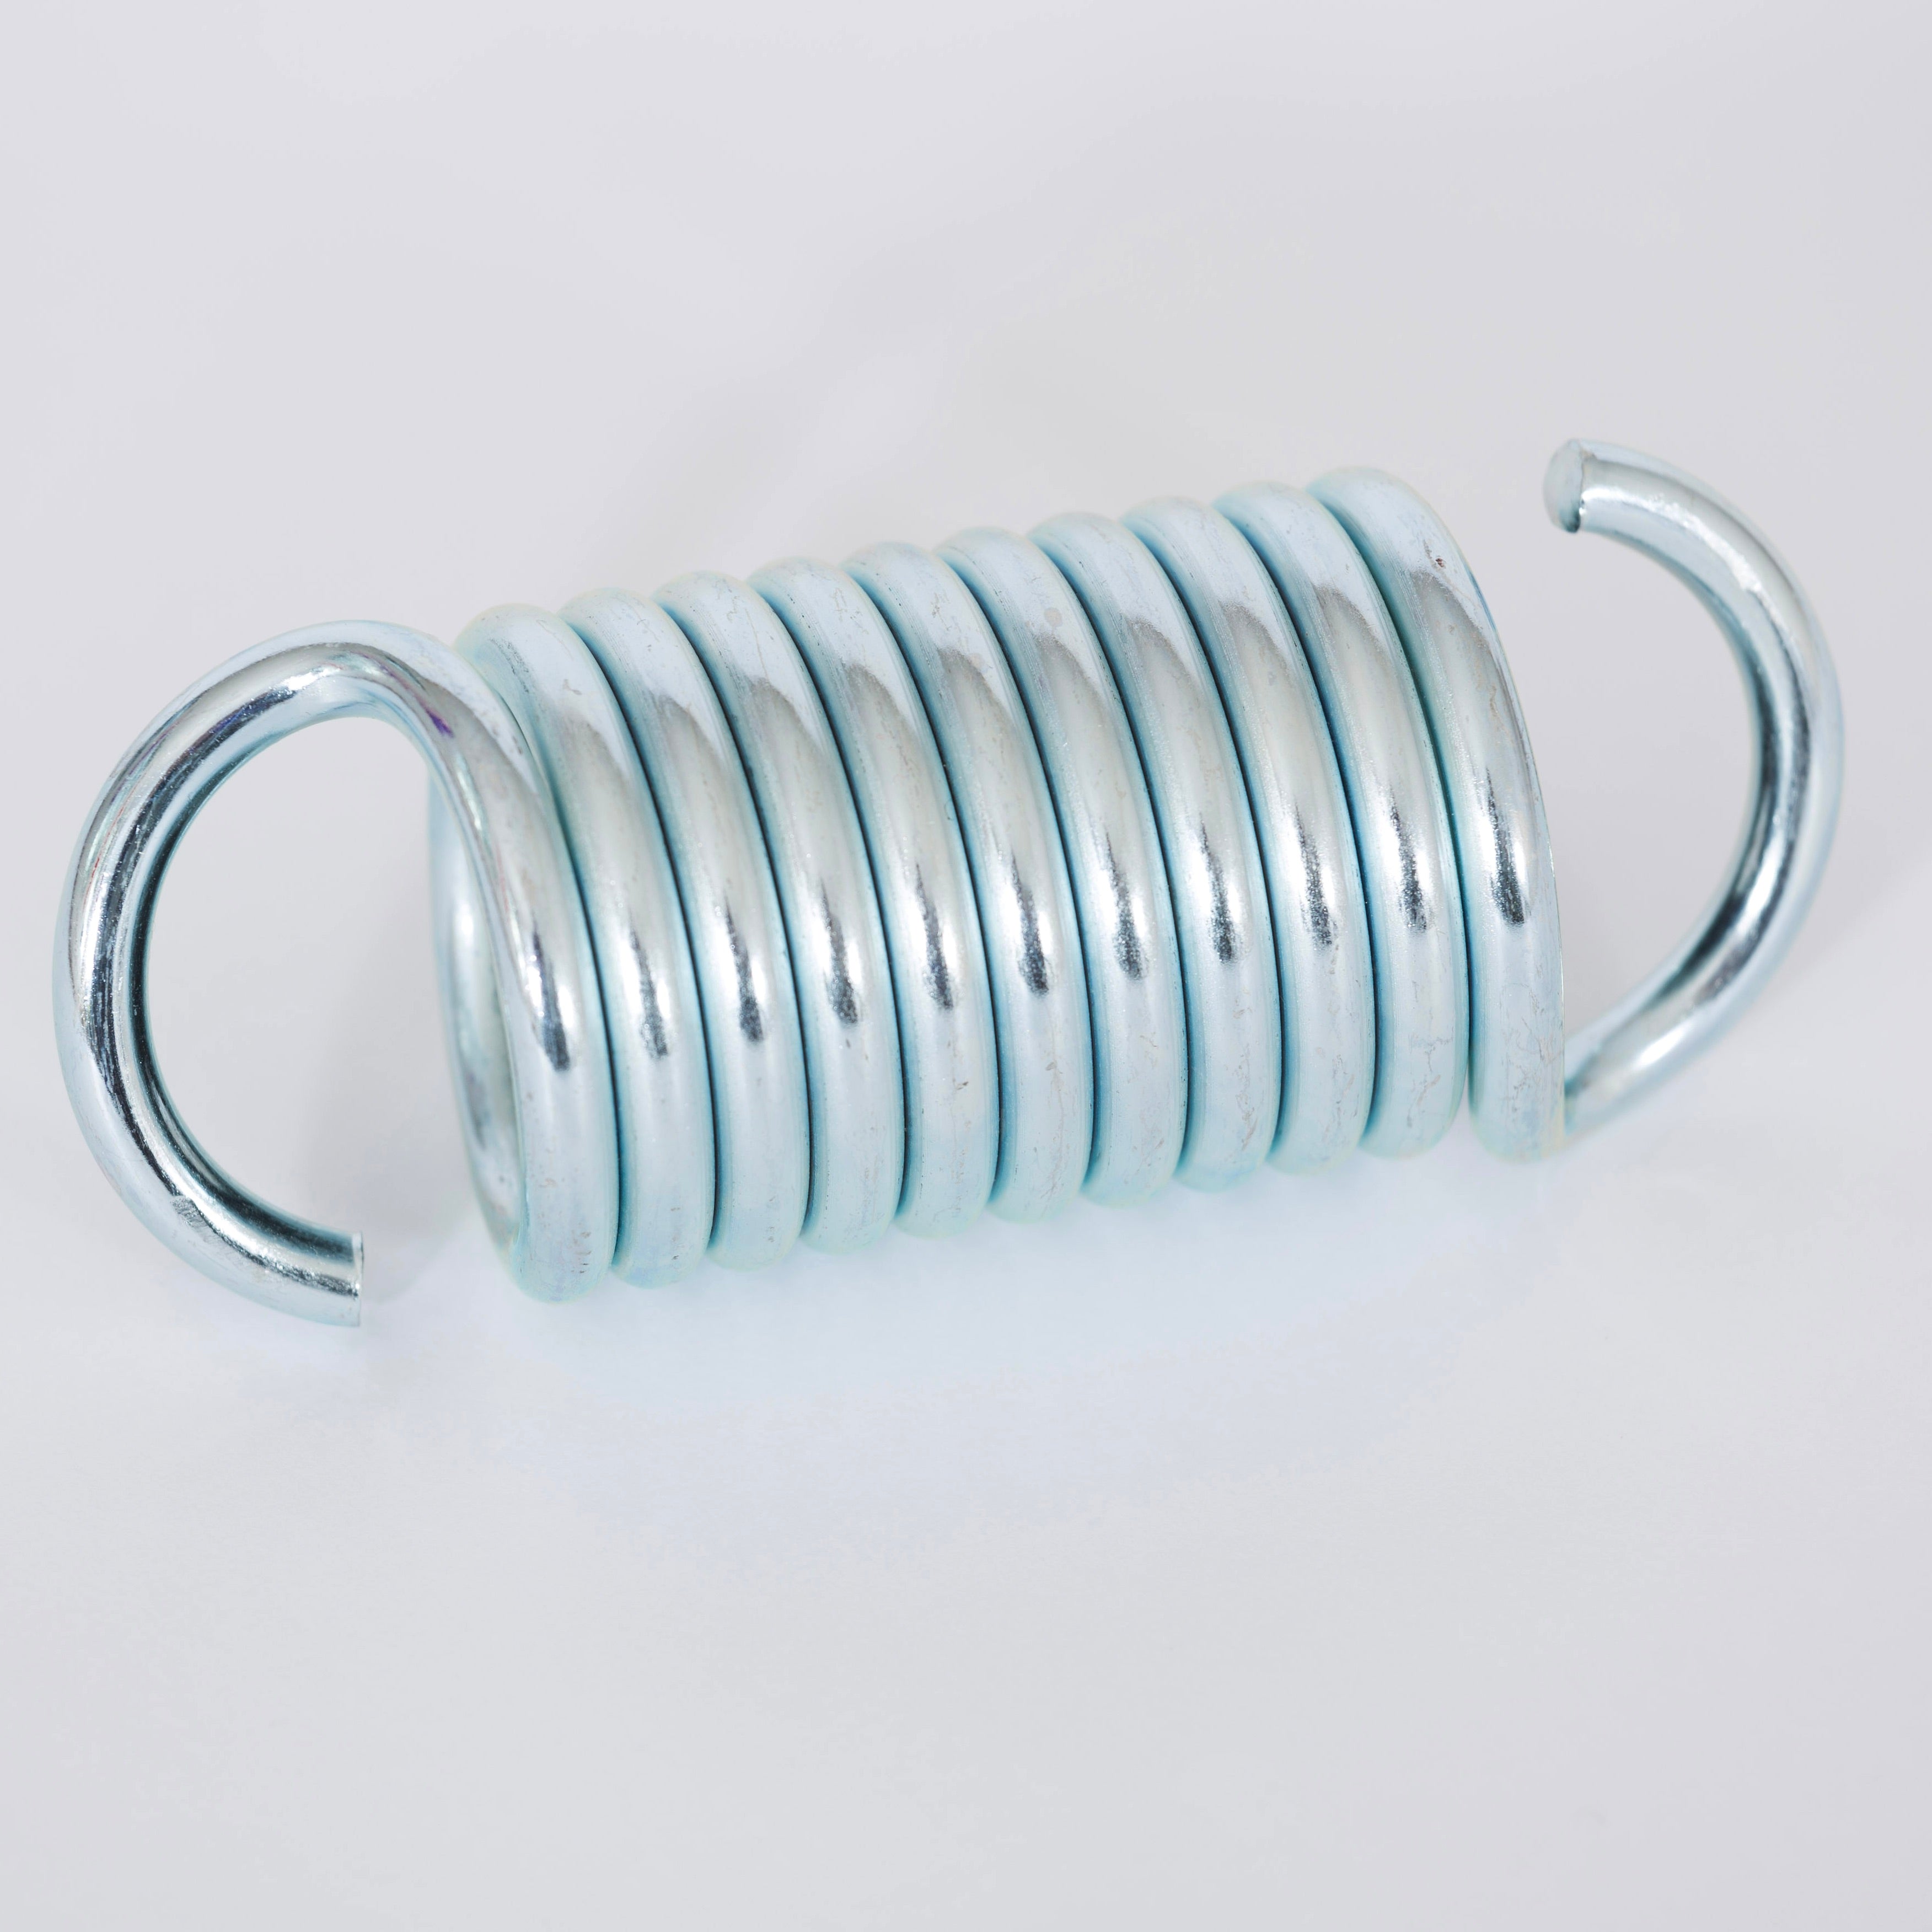 Attachment SPIRALFEDER for hanging chairs 